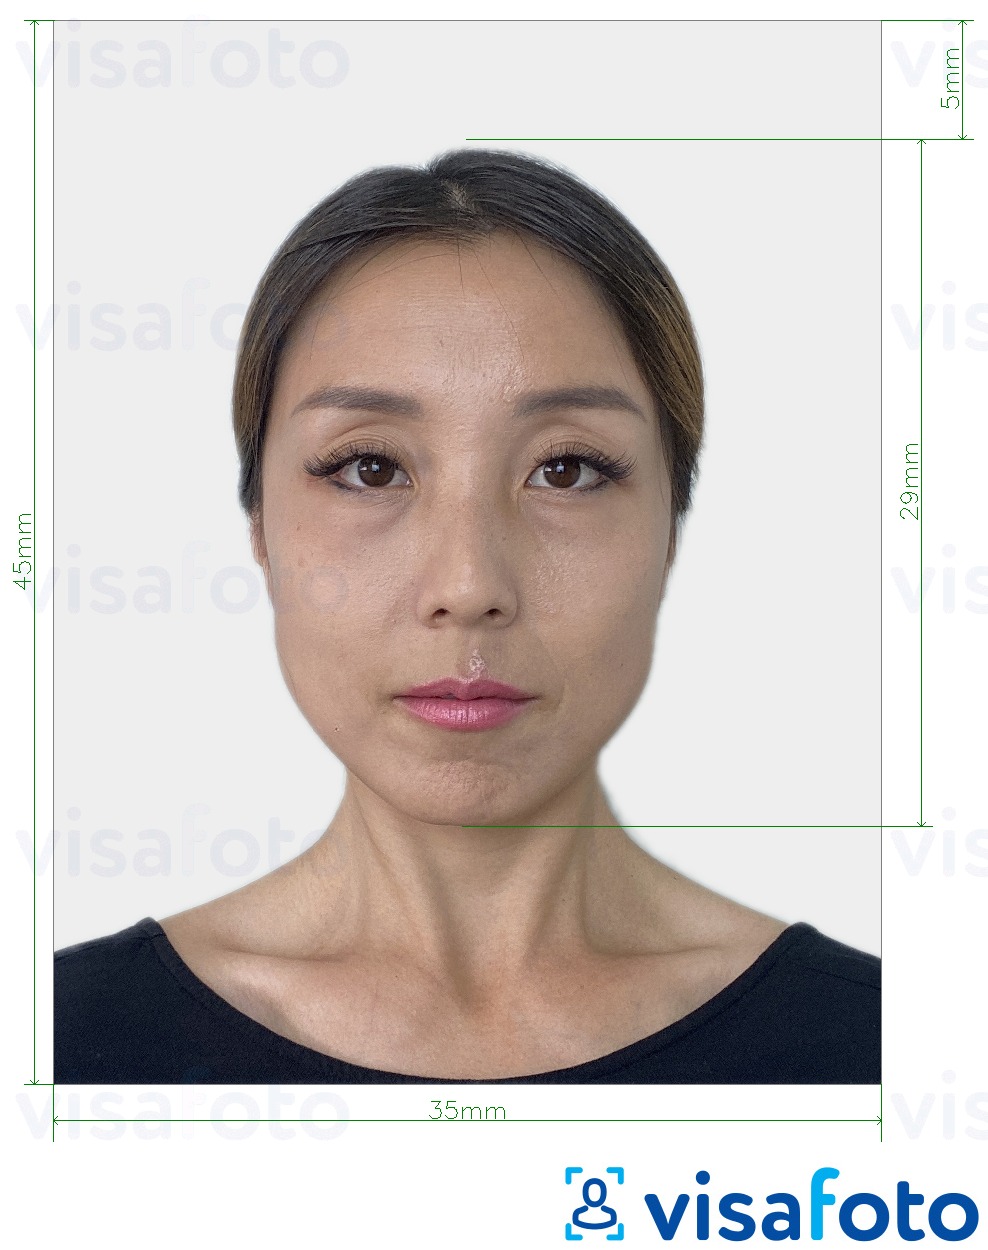 Example of photo for Japan e-visa 35x45 mm with exact size specification